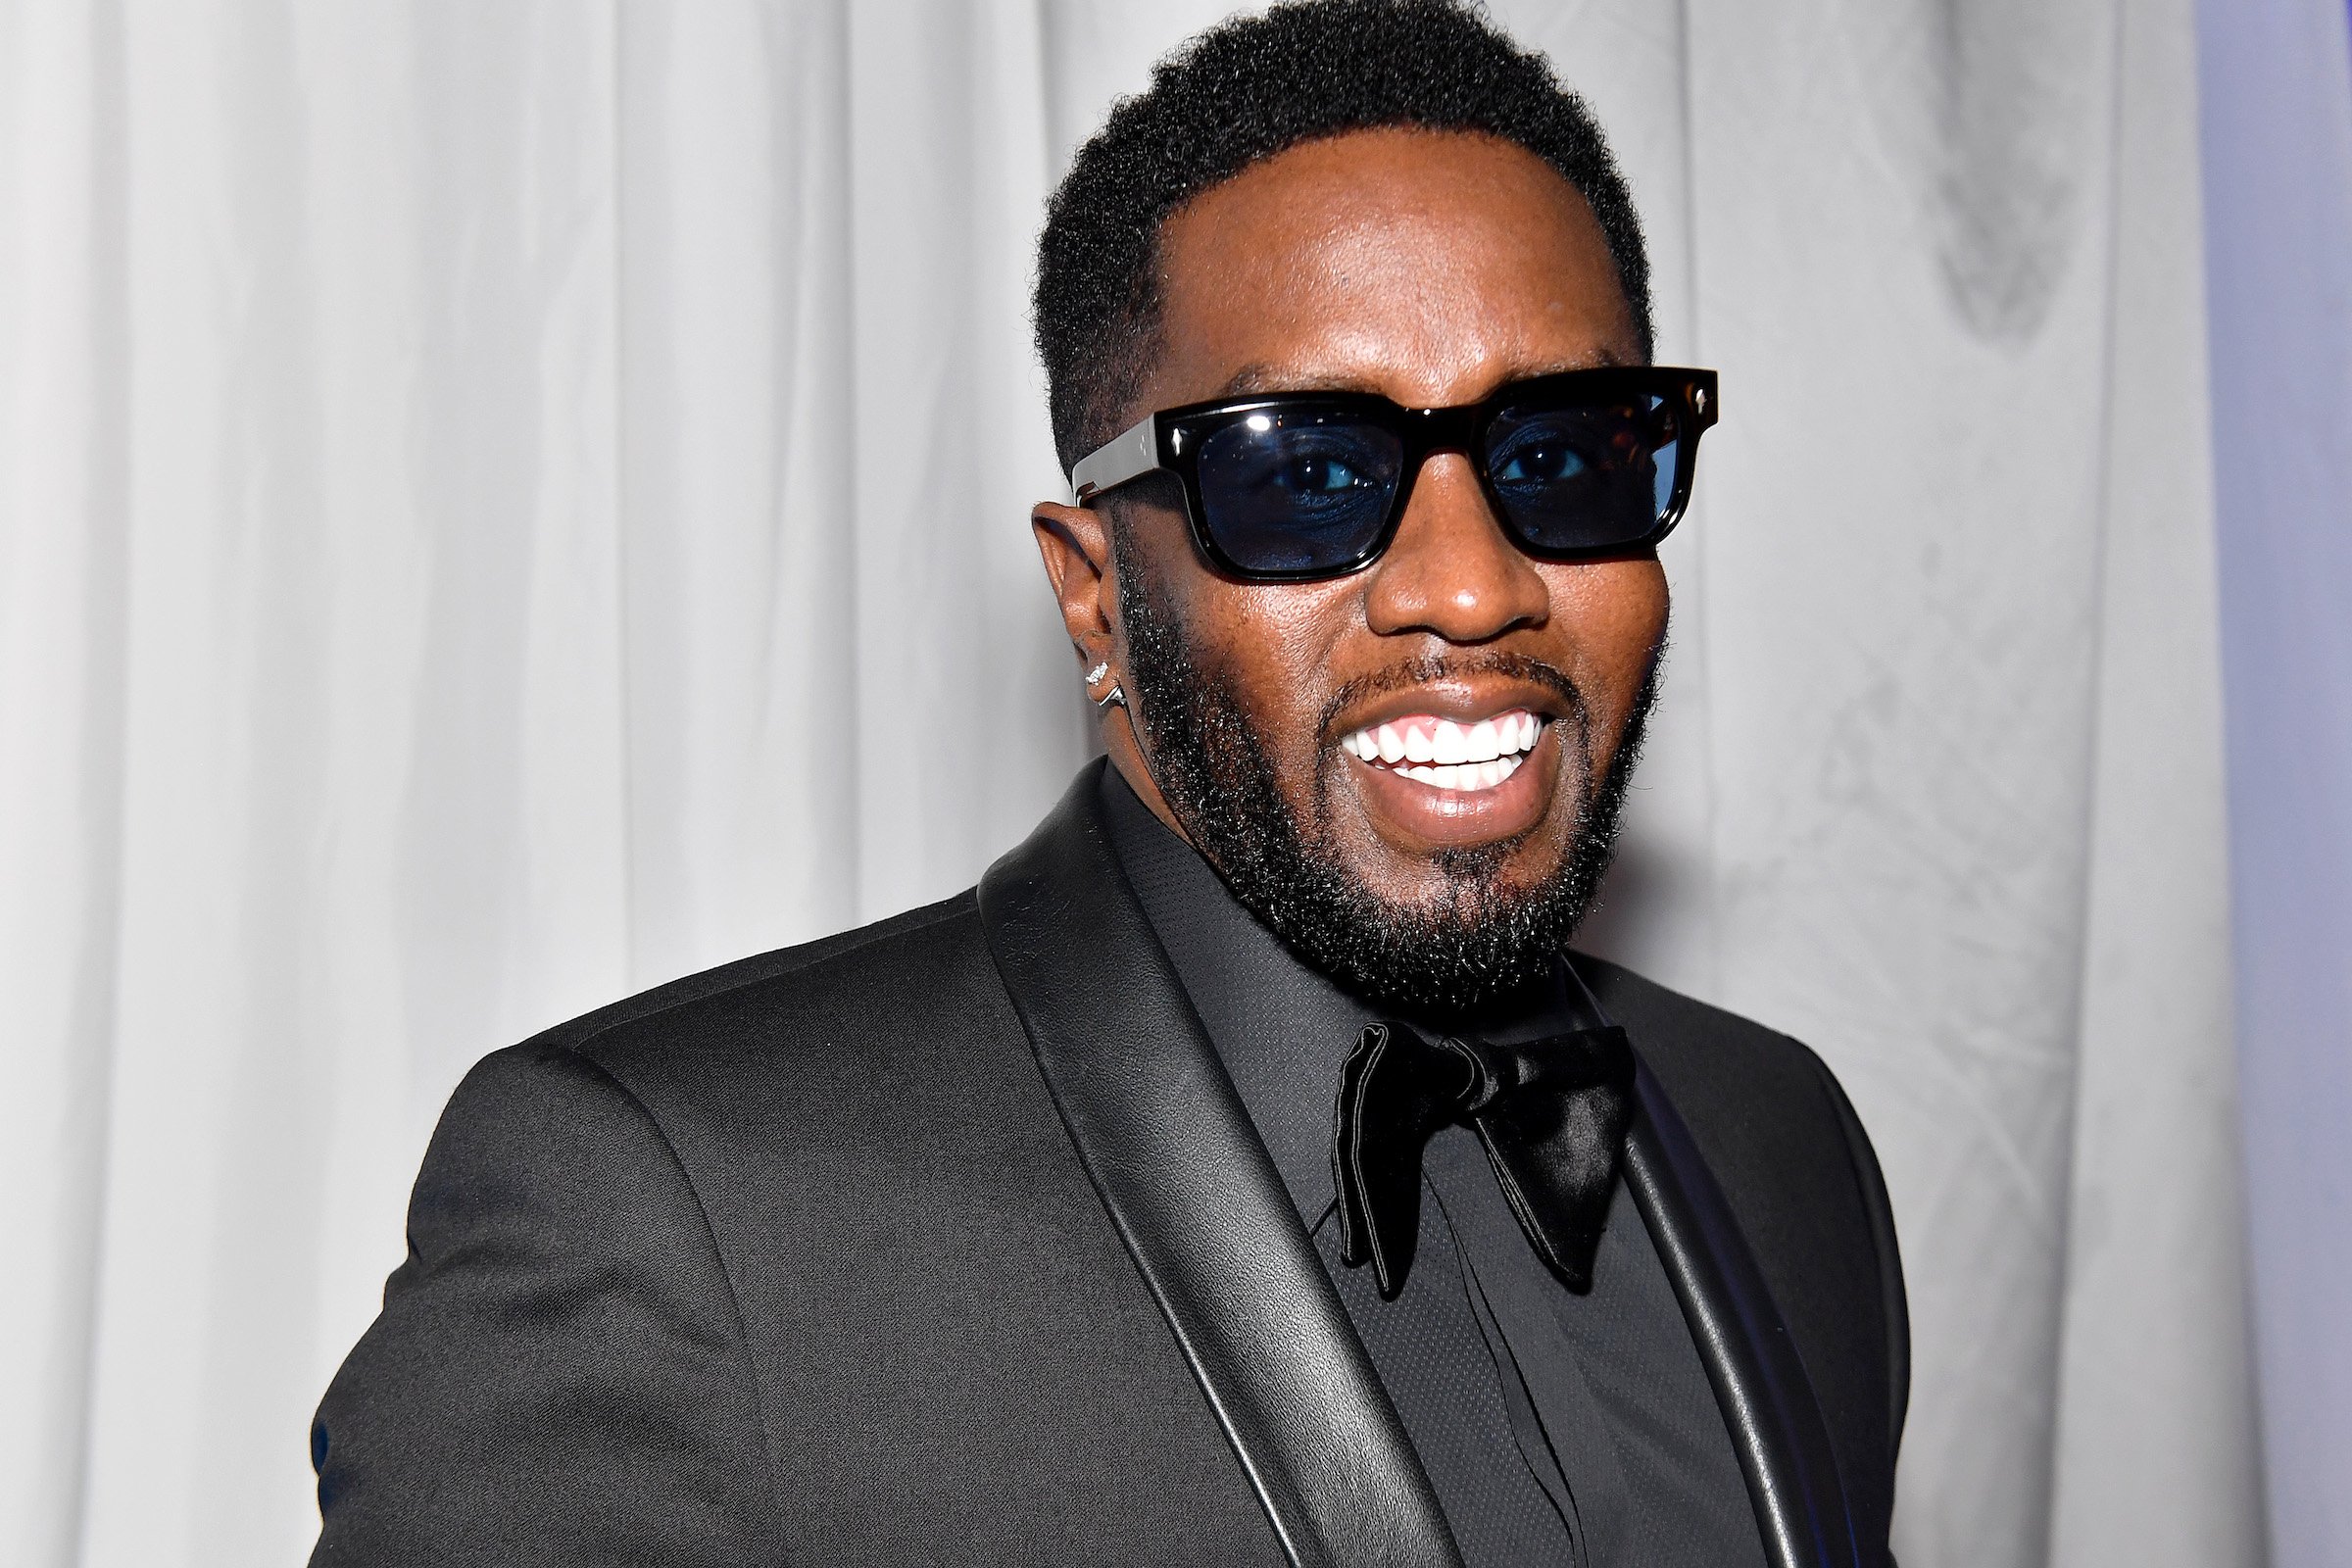 Sean "Diddy" Combs, who has bought fake diamonds before